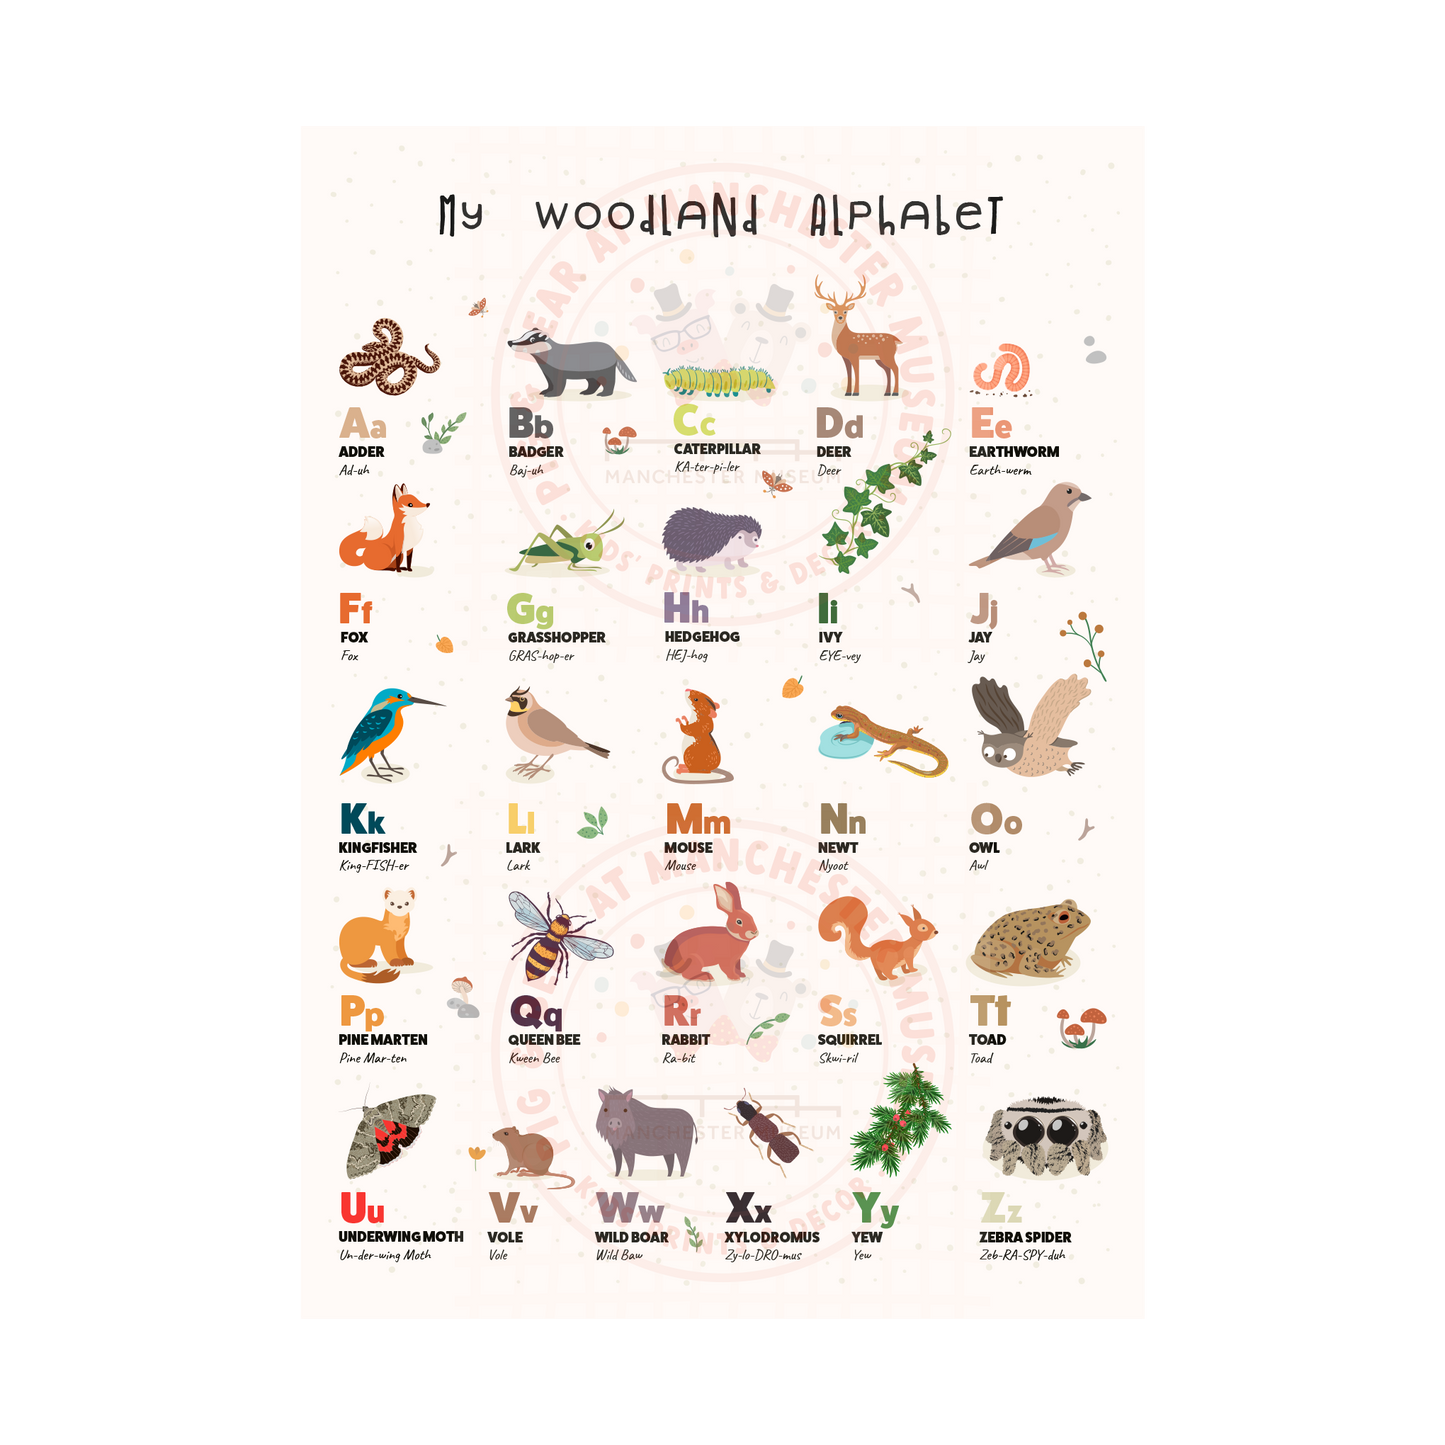 Print with the headline text, my woodland alphabet. Woodland wildlife and plants in rows of five with names to match the alphabet.